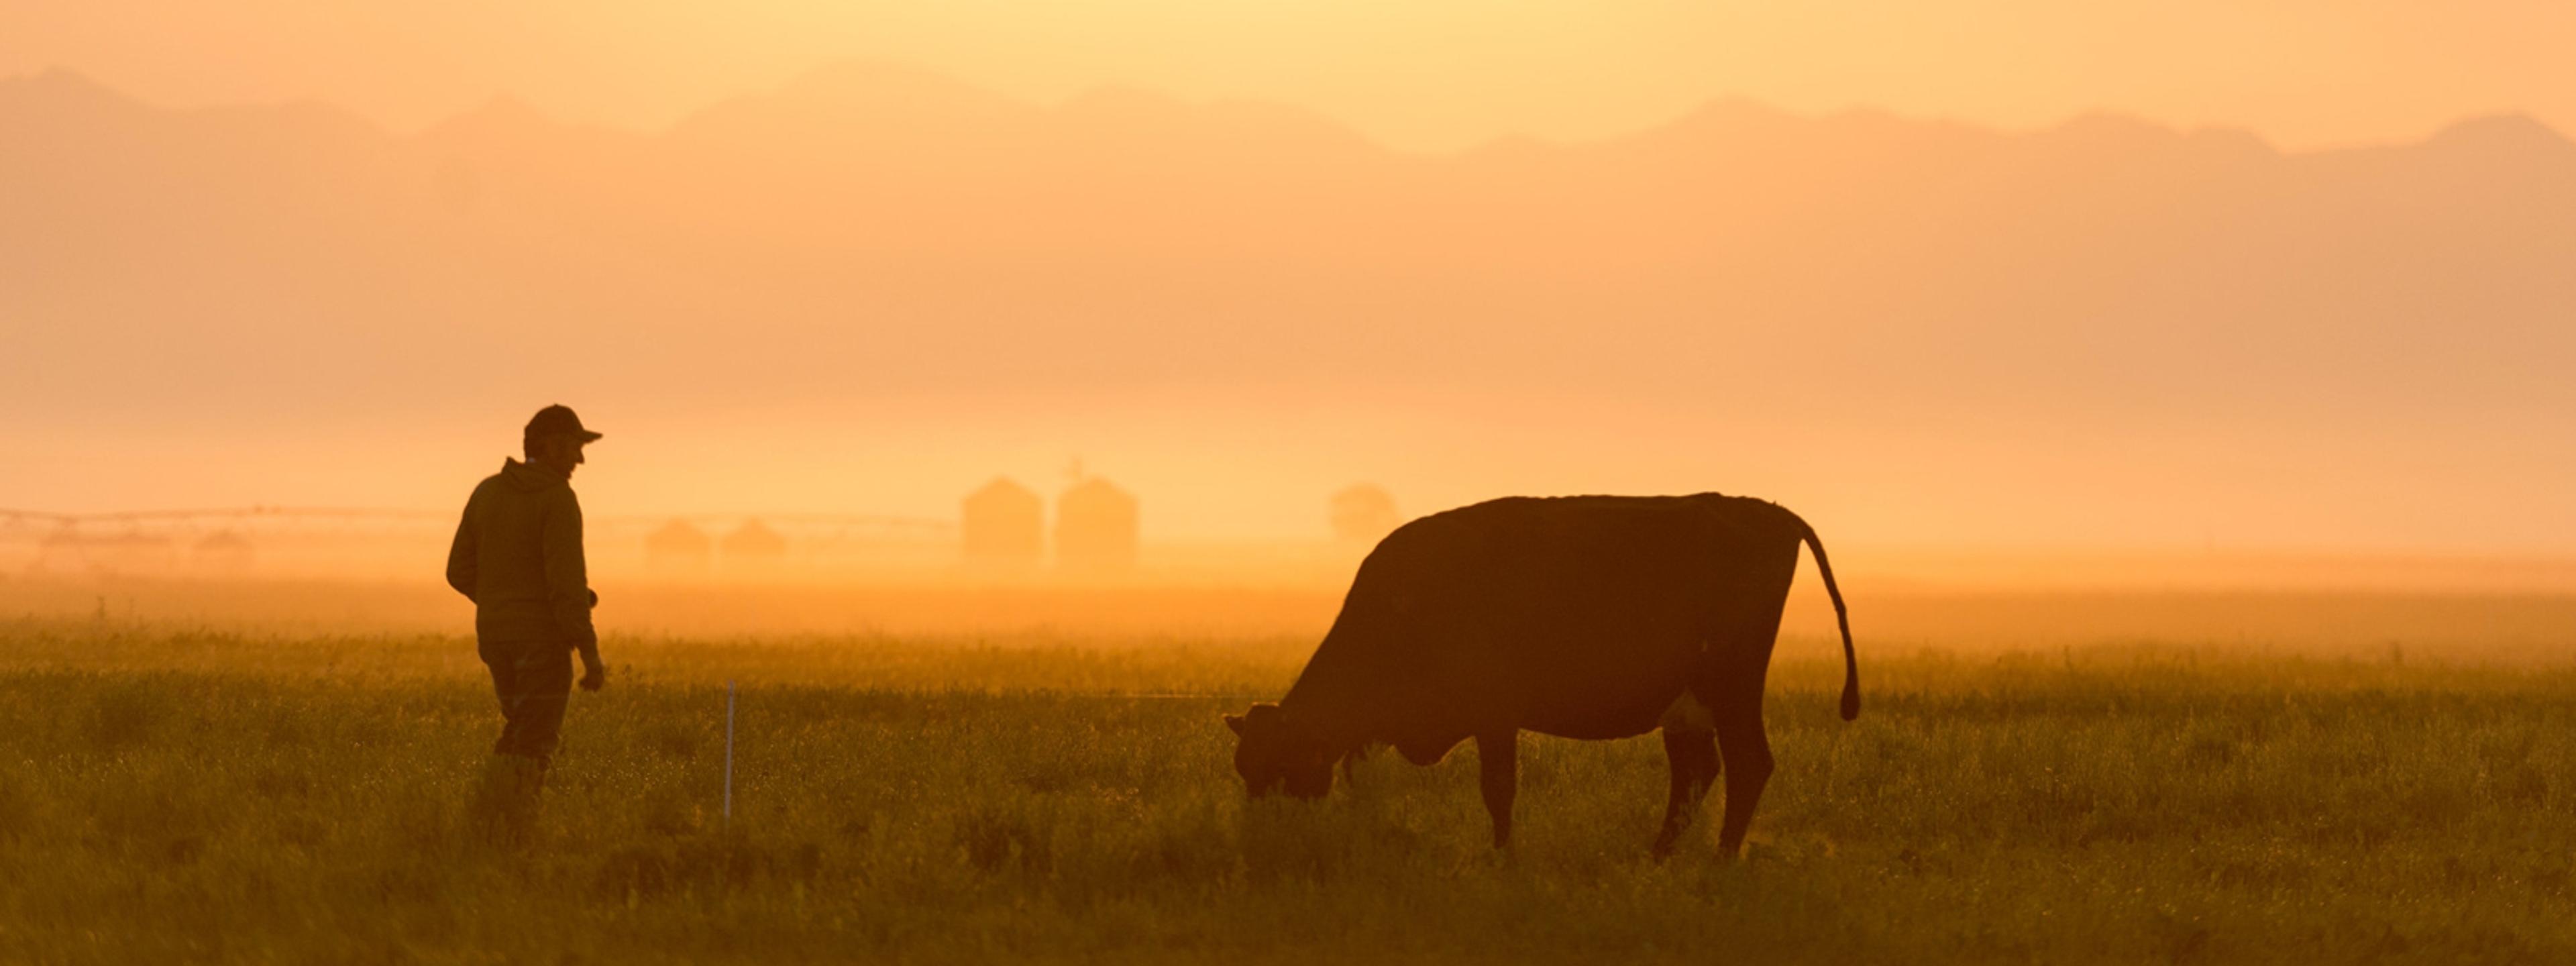 A farmer and a grazing cow are silhouetted against a hazy orange sunset